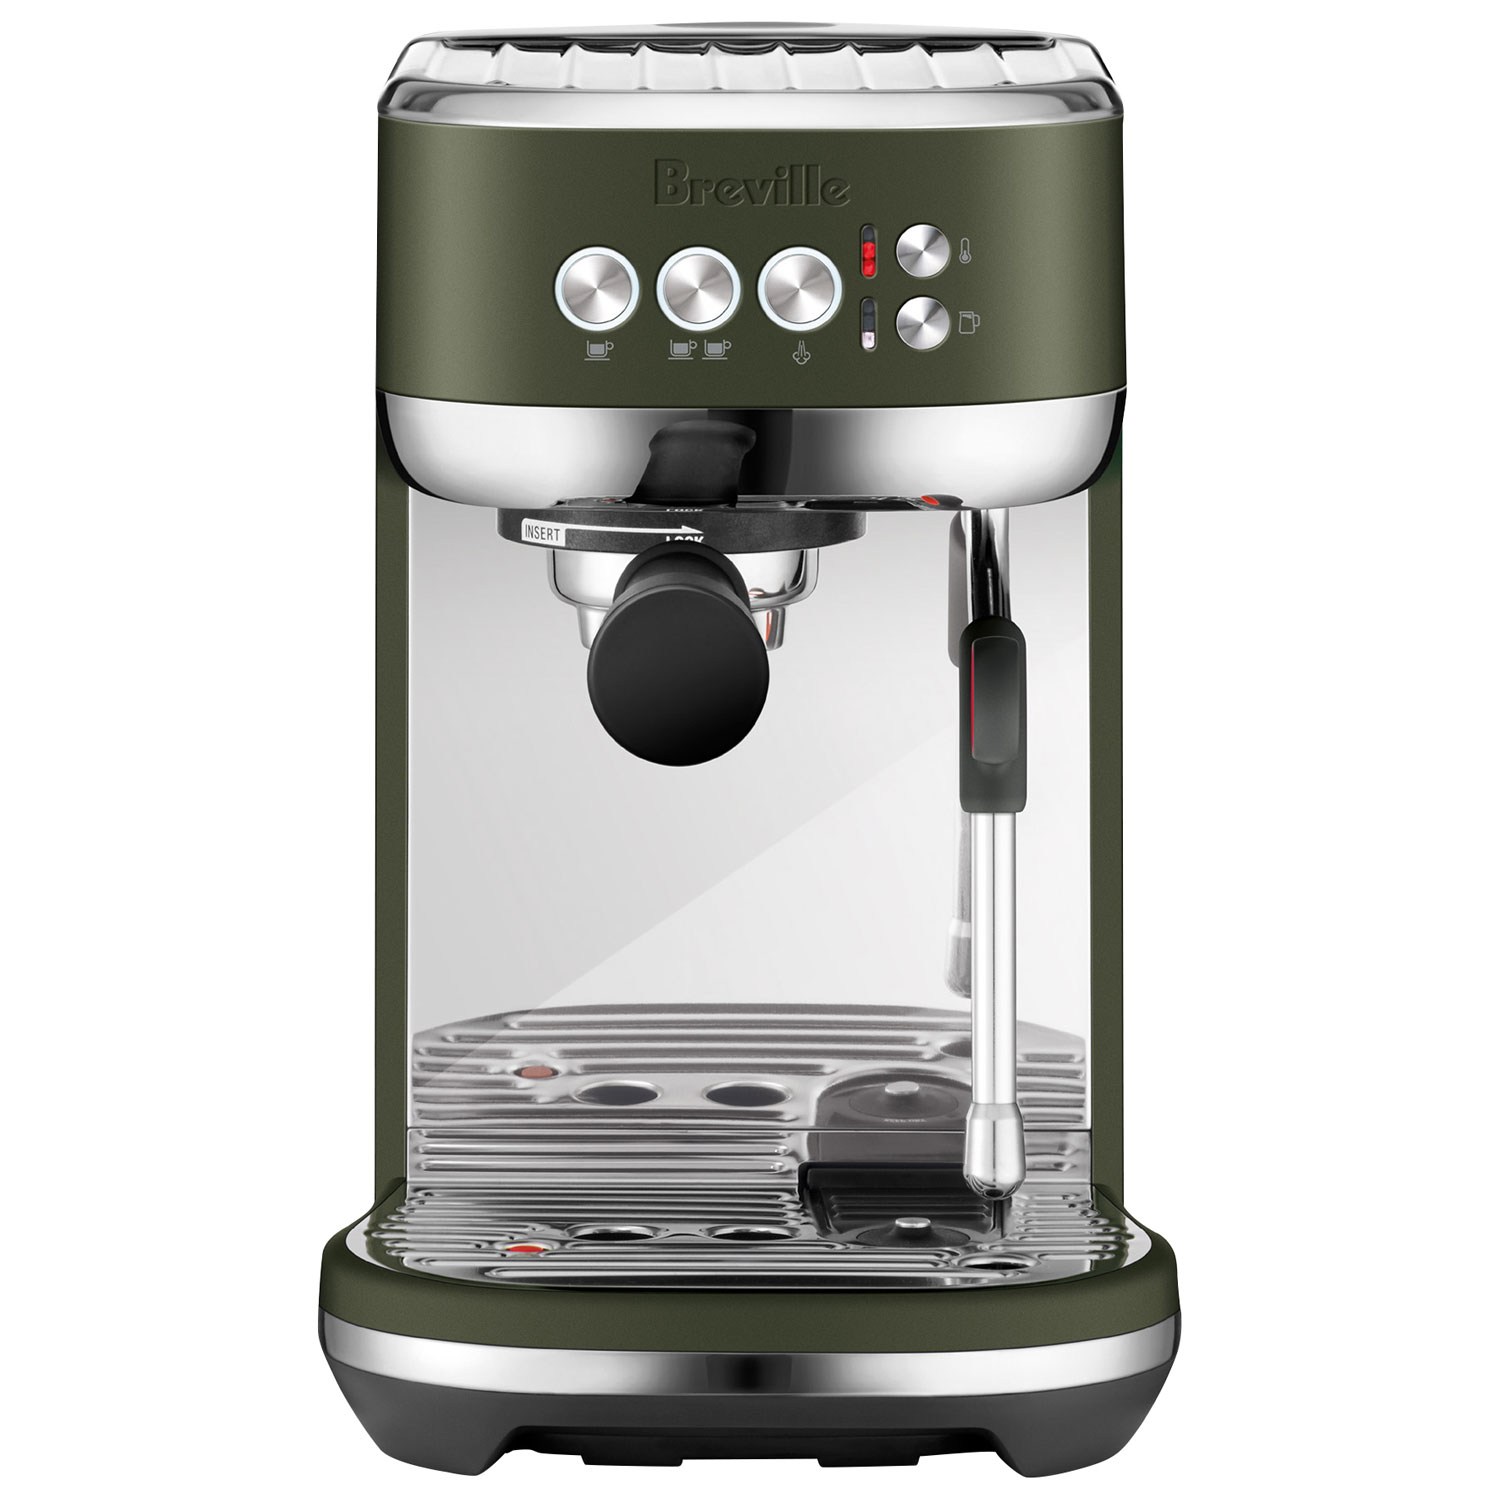 Breville Bambino Plus Automatic Espresso Machine with Frother - Olive Tapenade